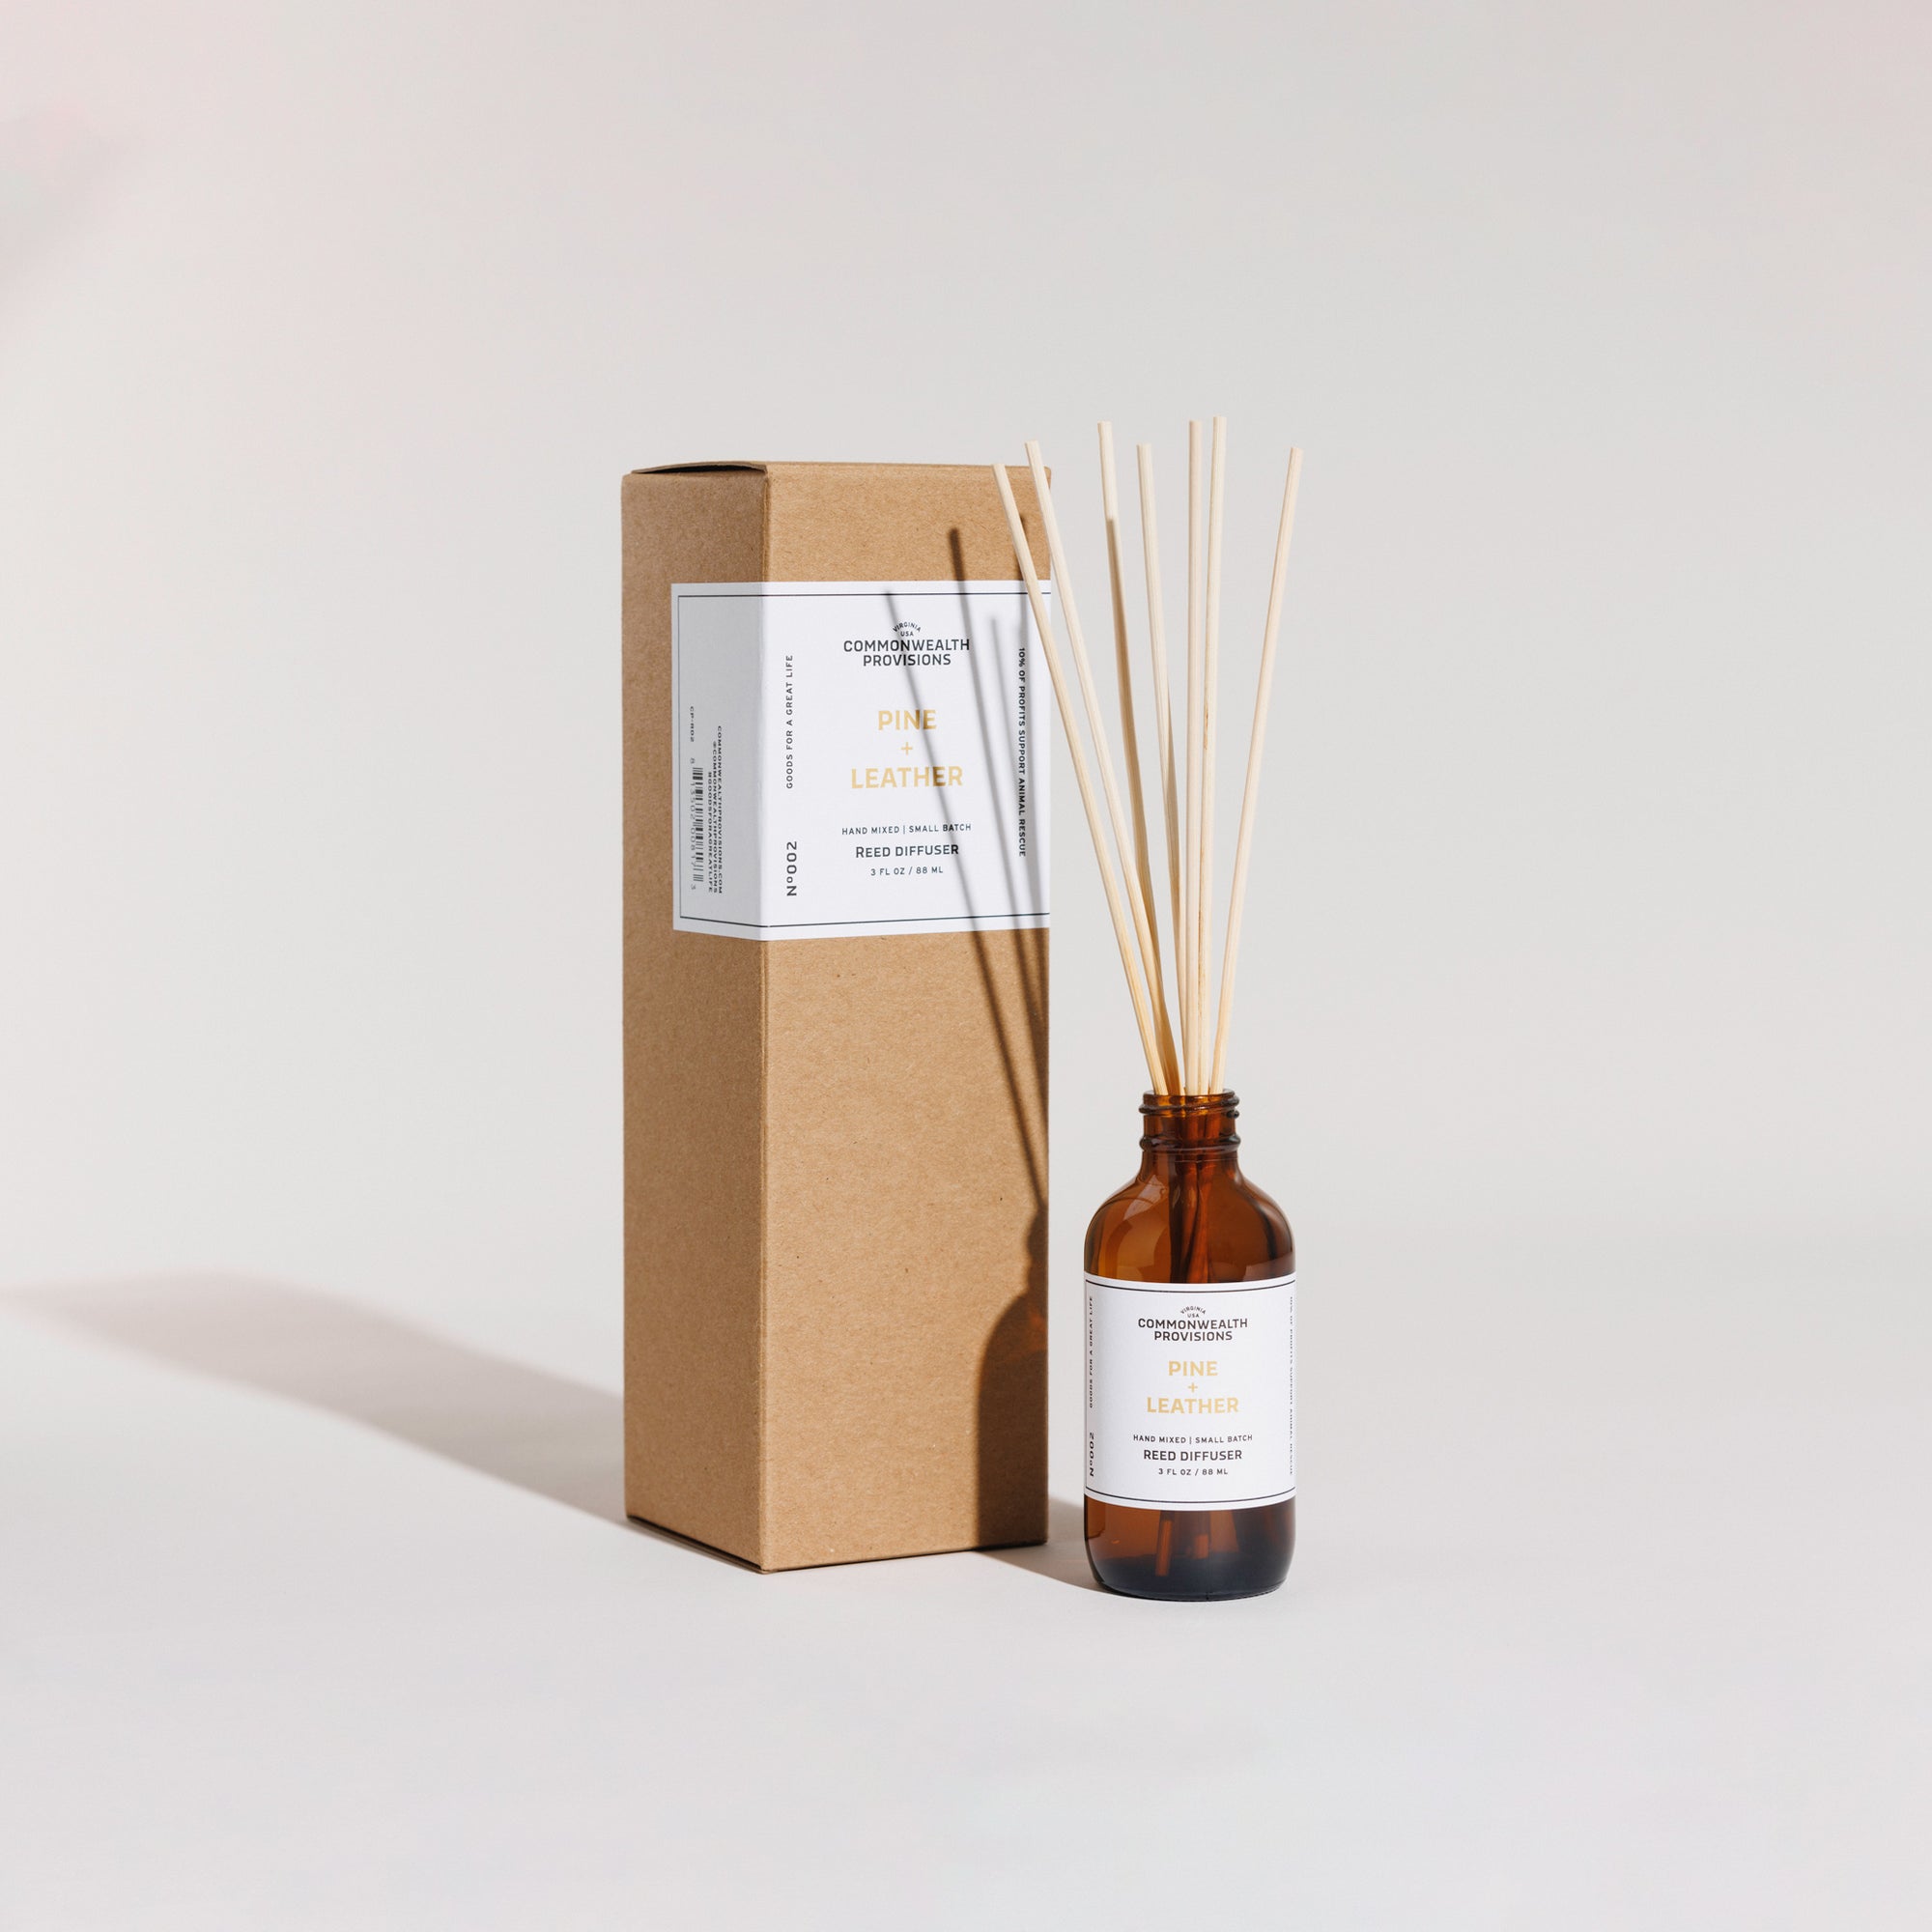 Pine + Leather Reed Diffuser | Commonwealth Provisions